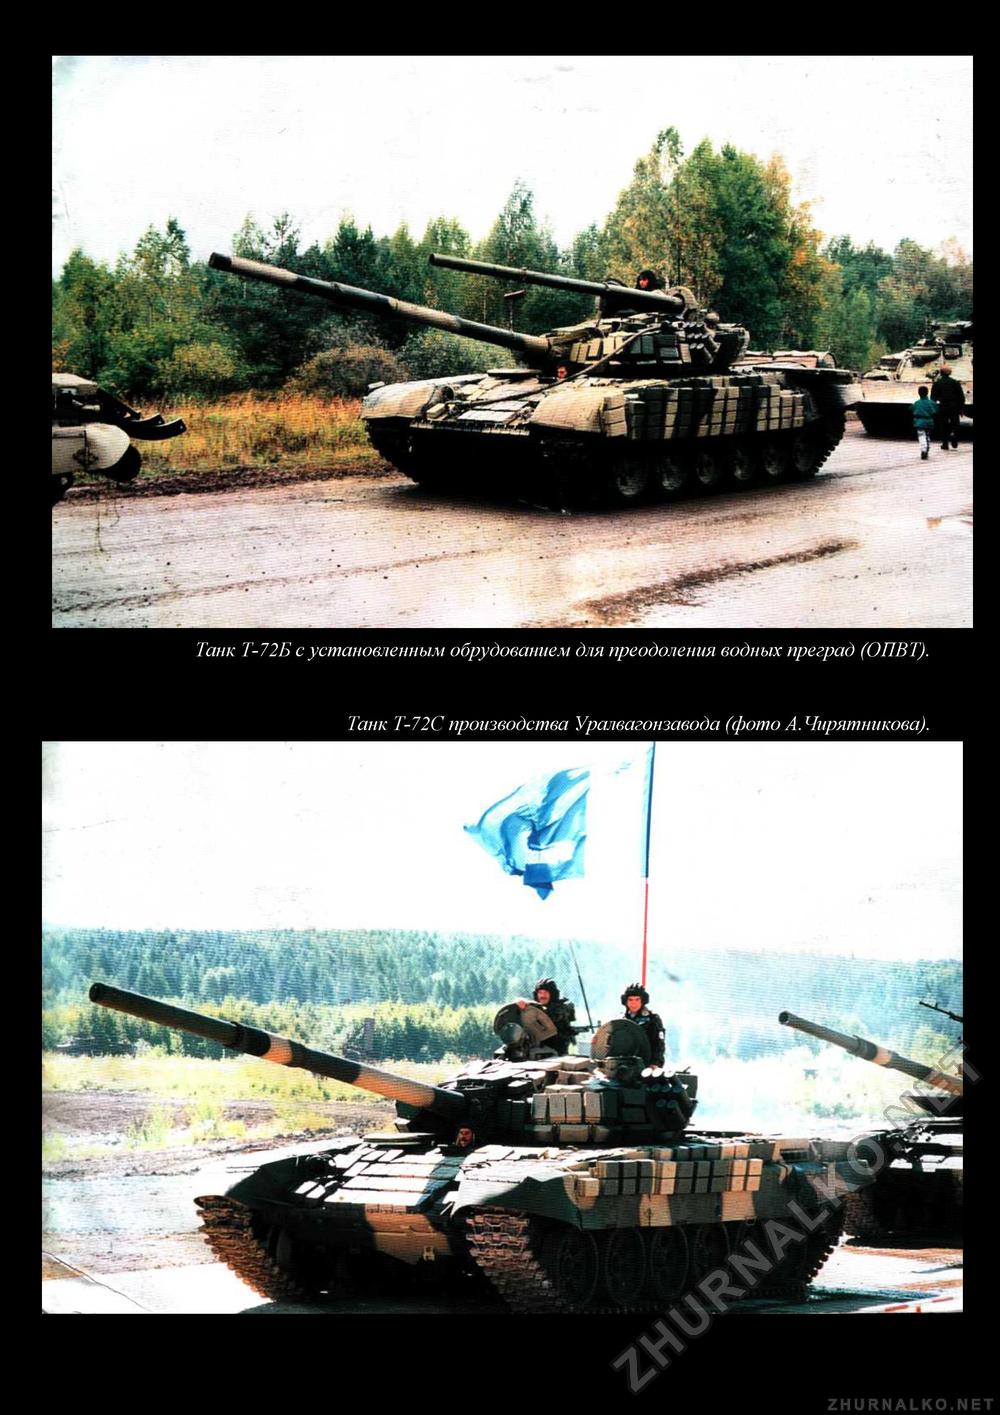  Special -  T-72,  2